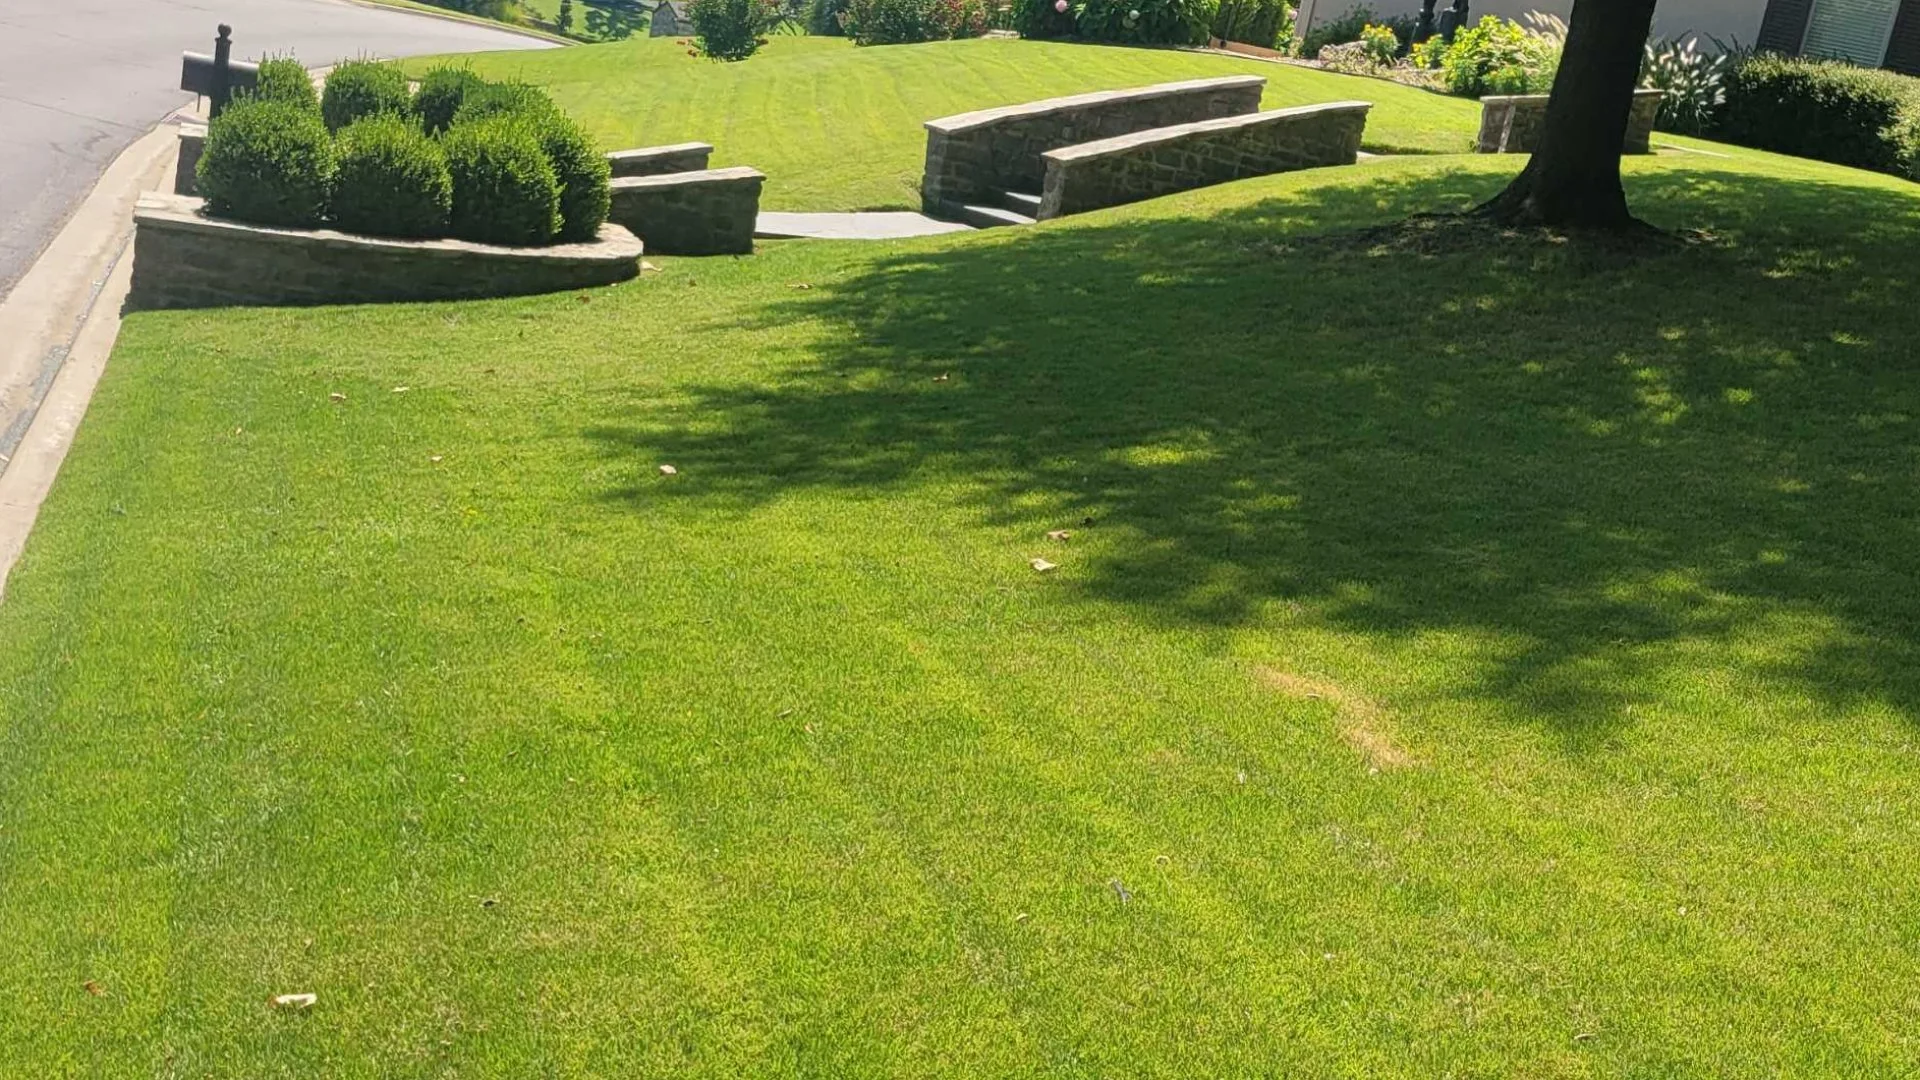 Ready to Mow Your Sod for the First Time? Make Sure to Follow These Rules!